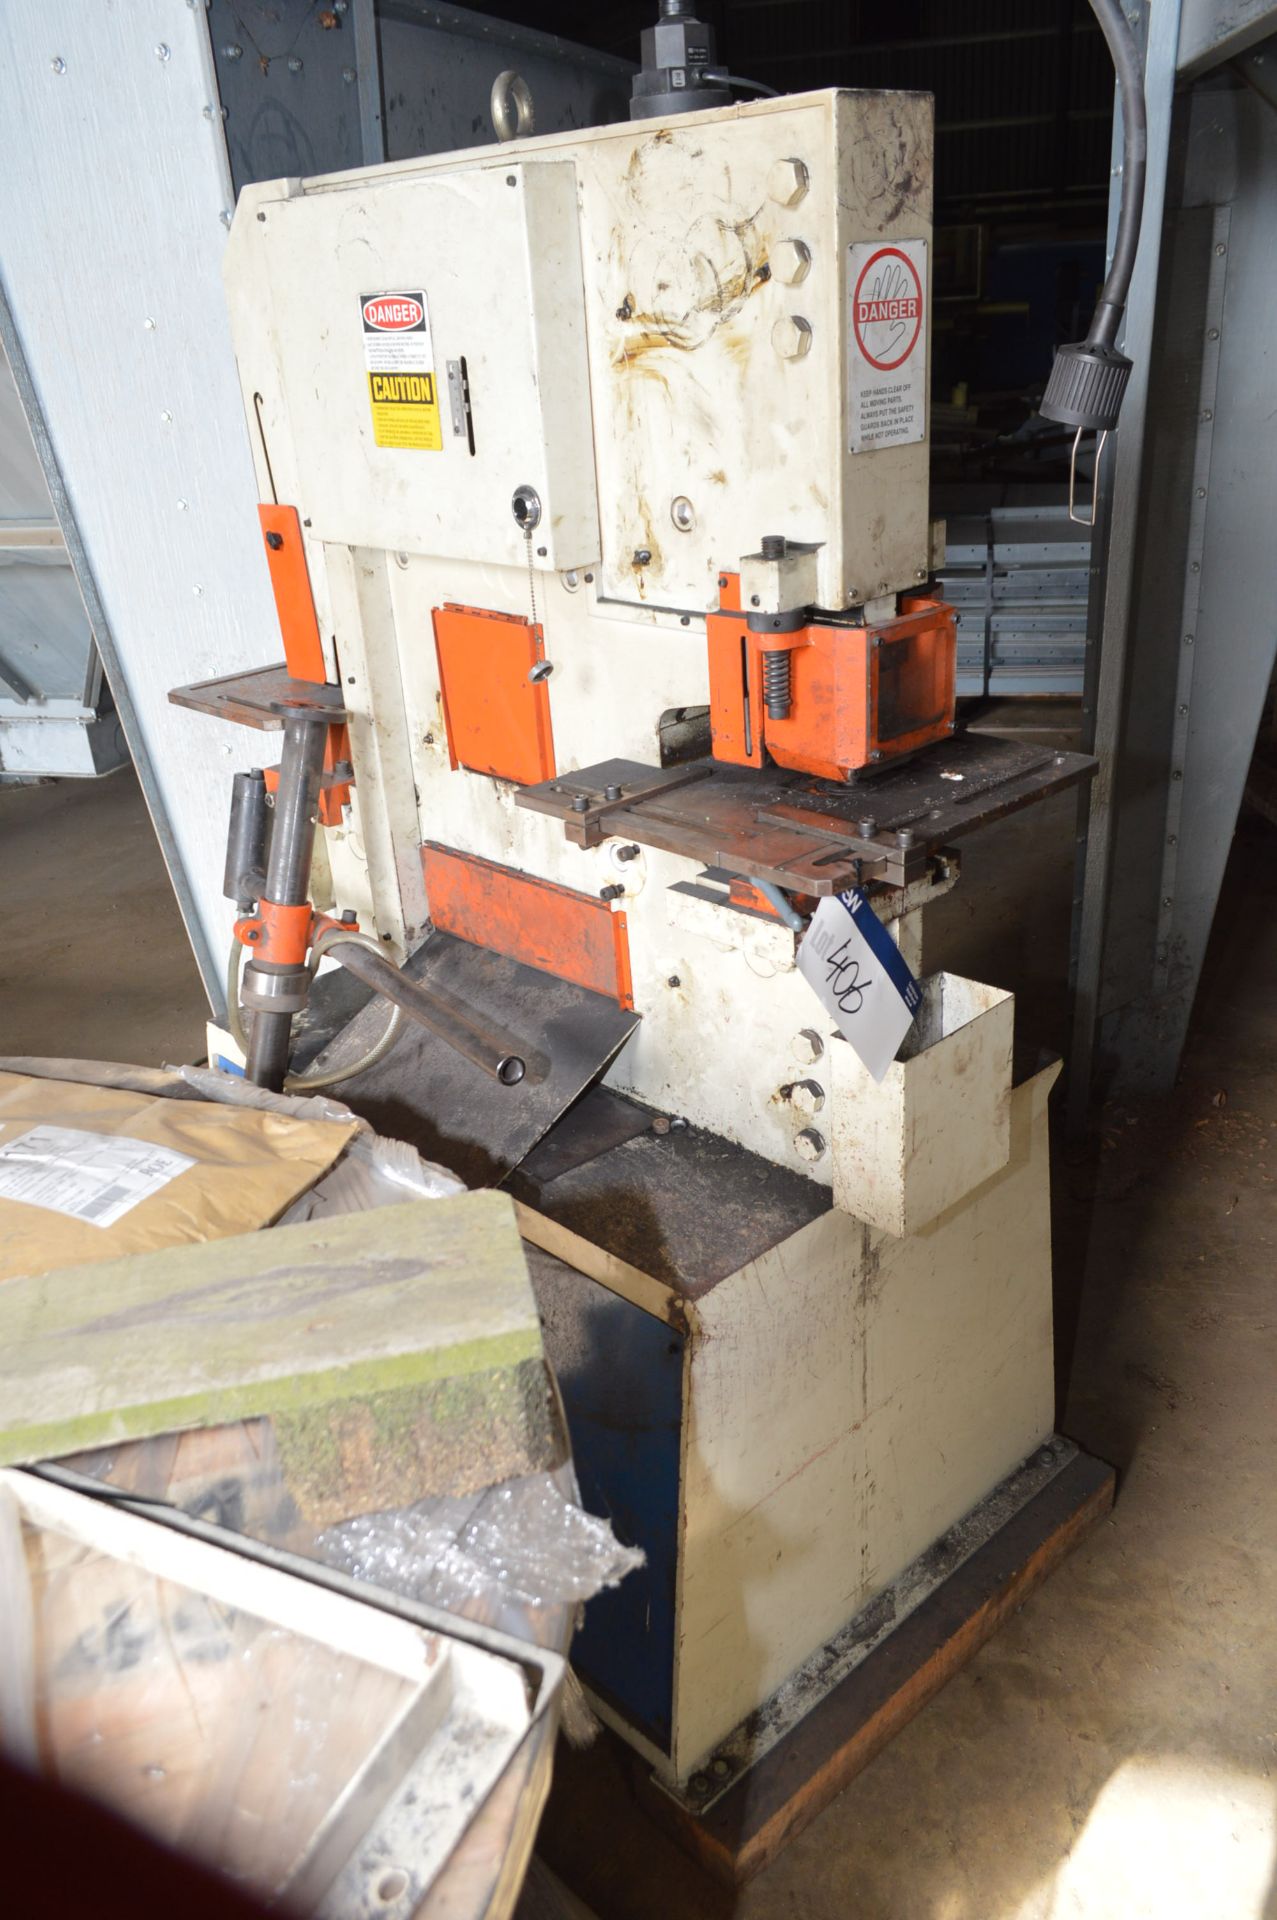 Sunrise IW-60K HYDRAULIC METAL WORKER, serial no. 348198, year of manufacture 2004, with punch